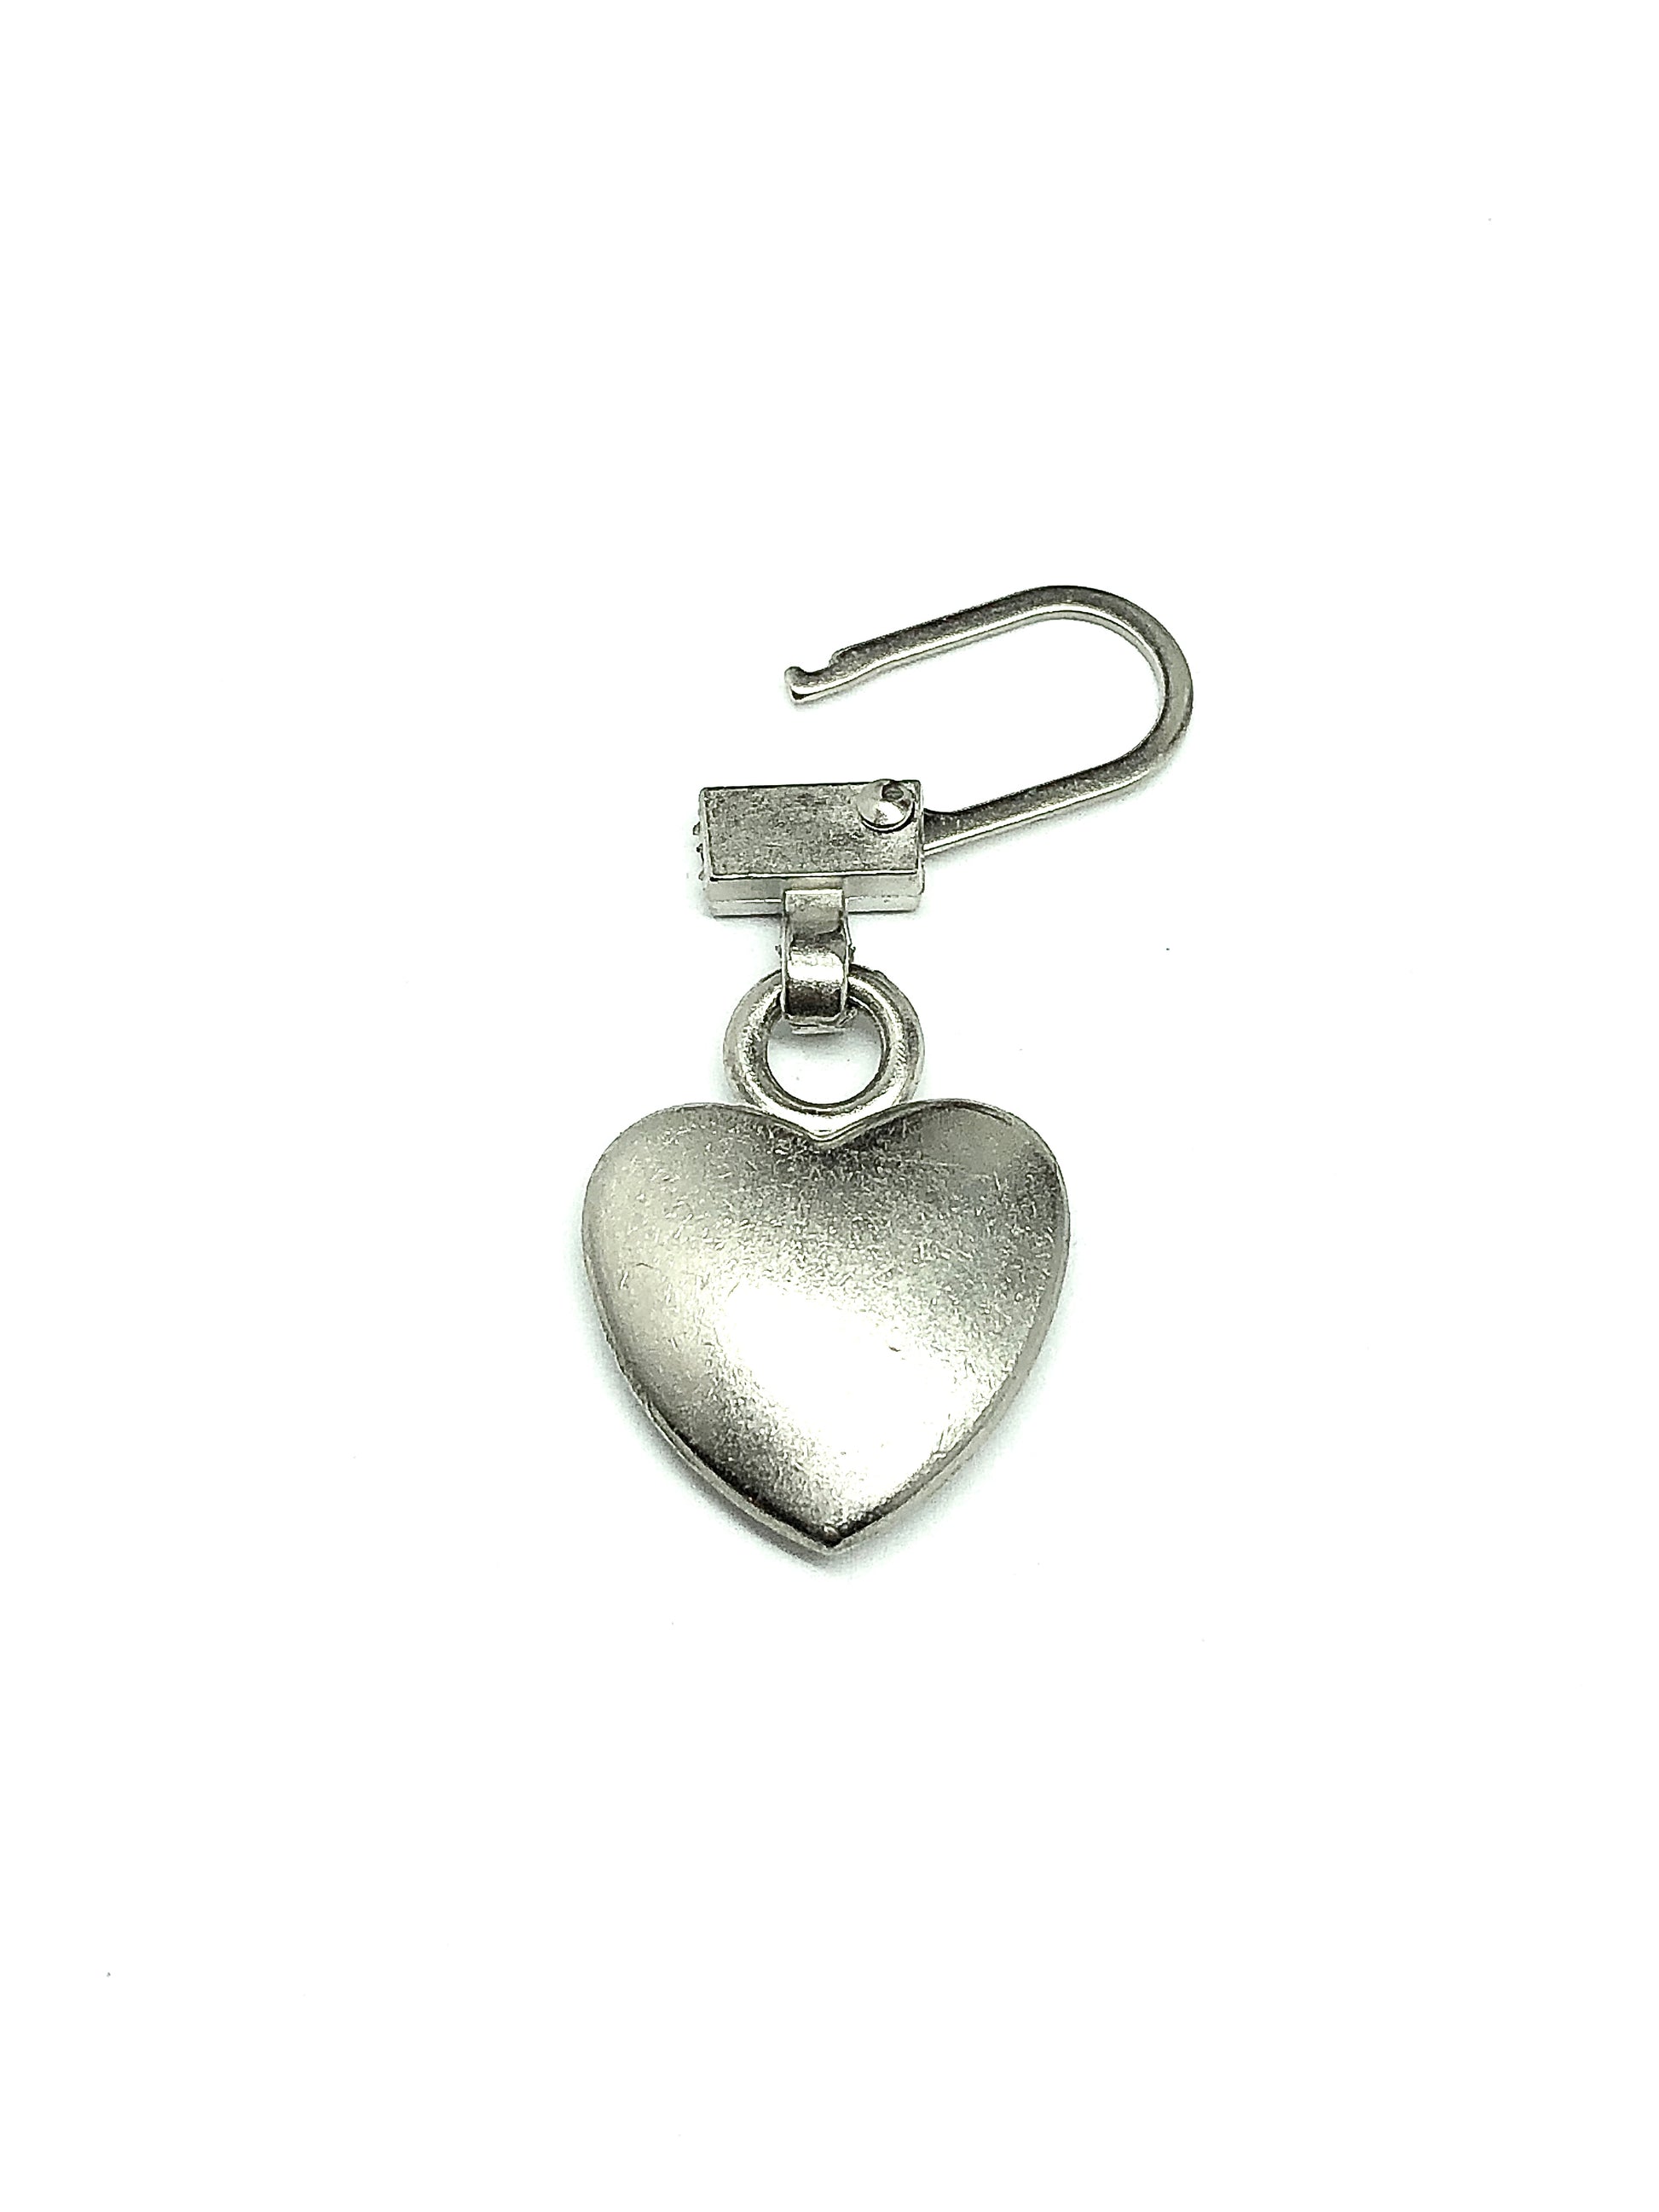 Zipper Repair Charm - Rustic Silver Heart Zipper Charm or Accessorize anything it can clip to! - Blingschlingers.com USA